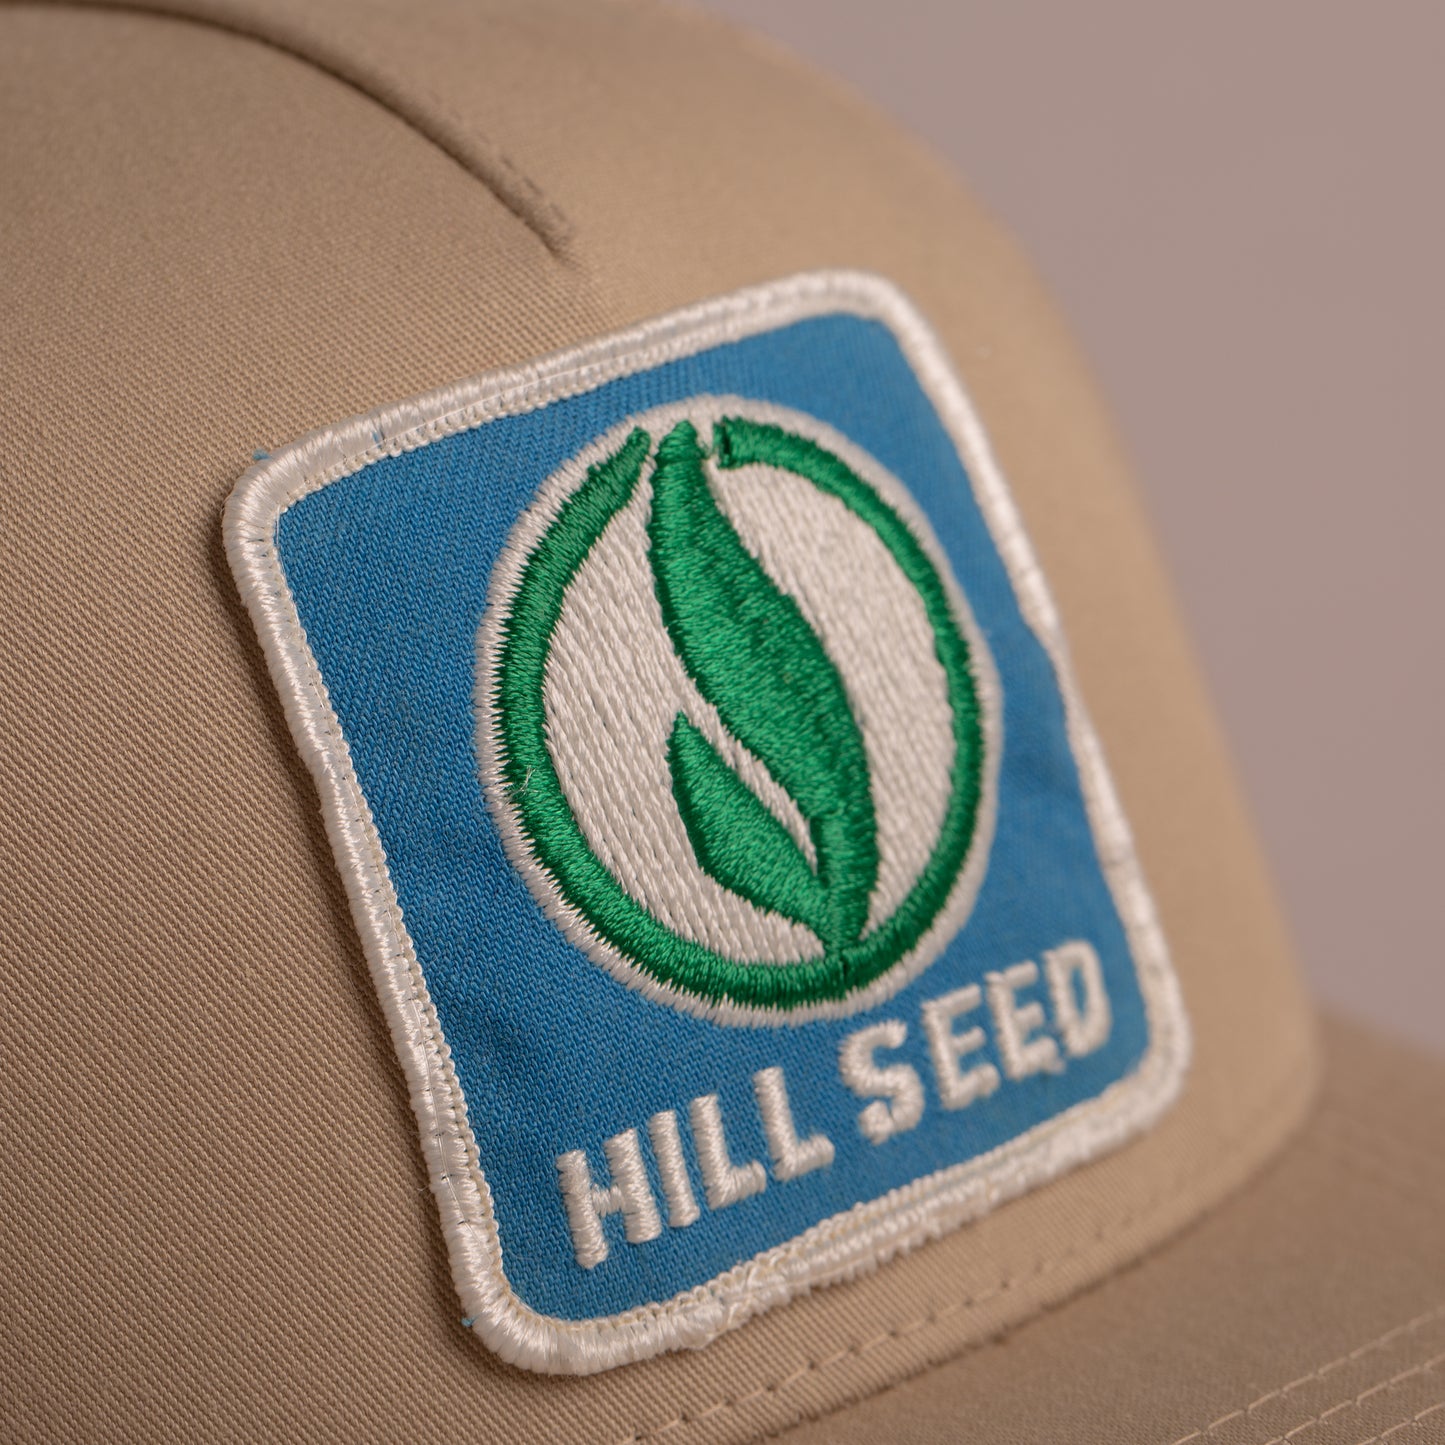 Hill Seed